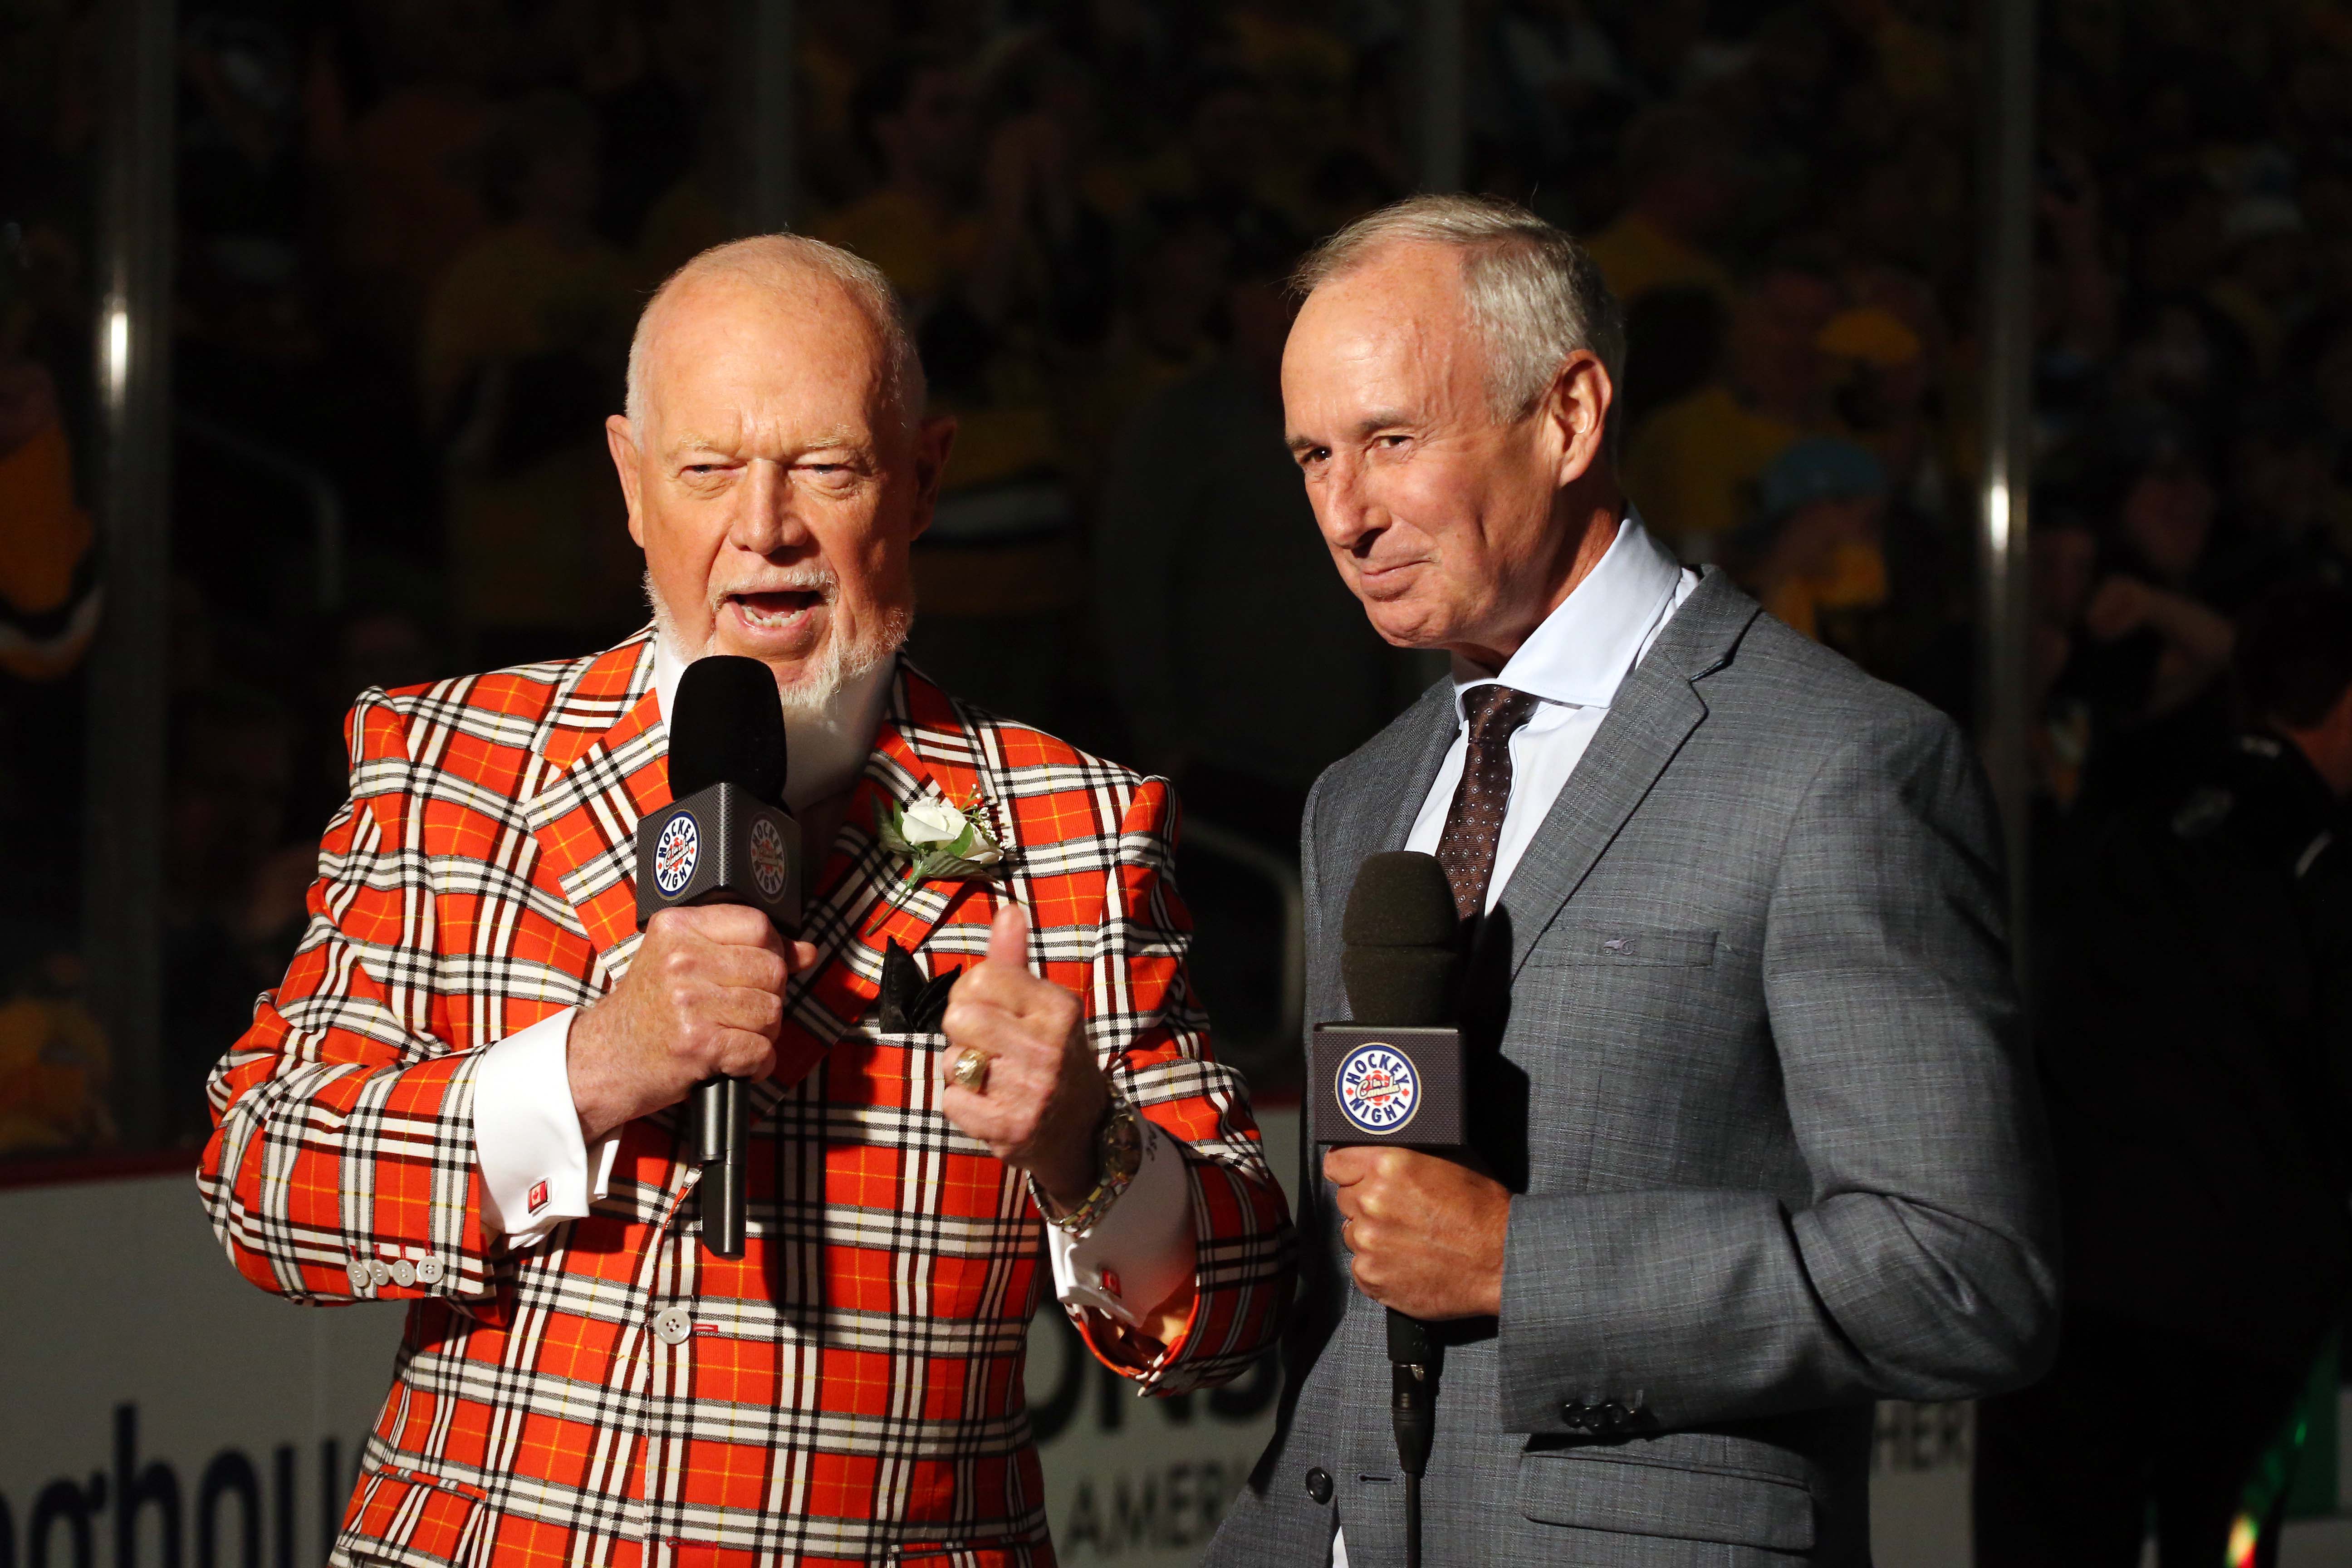 Hockey analyst Don Cherry fired for racist on-air comments